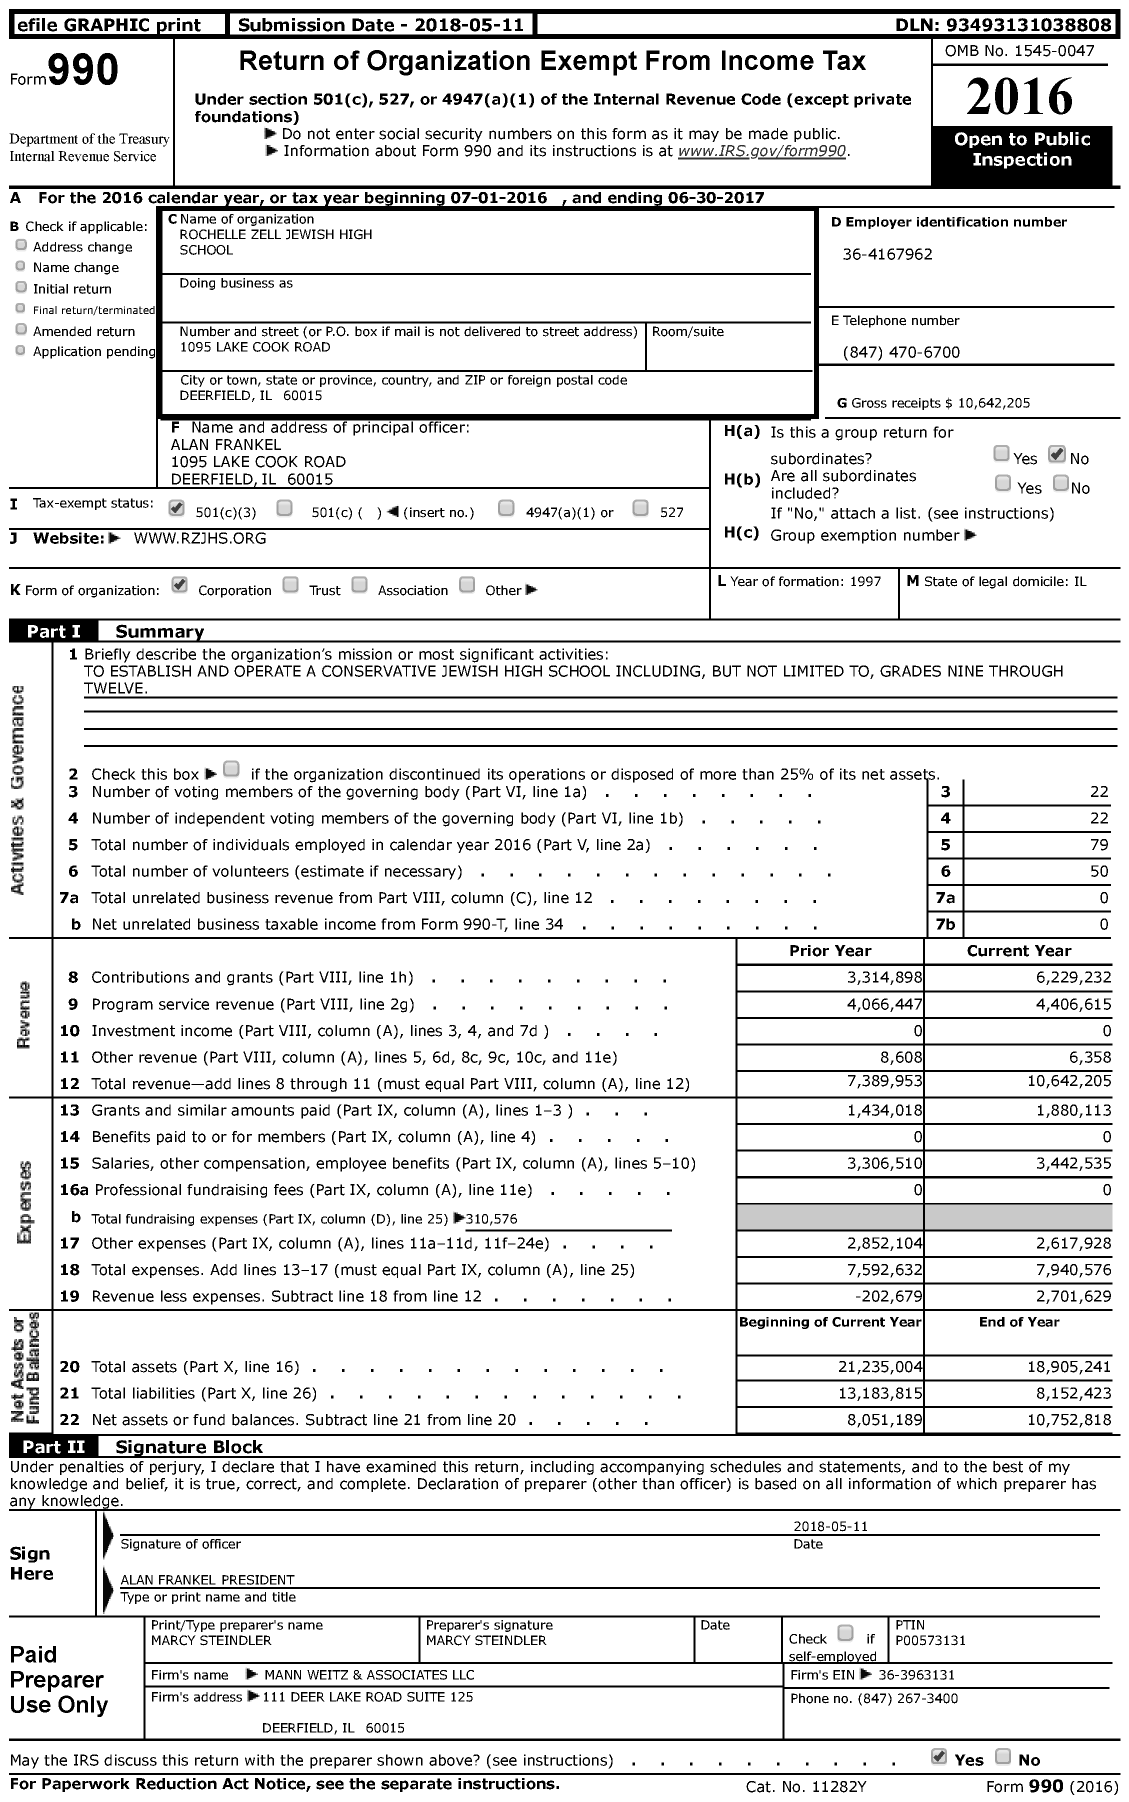 Image of first page of 2016 Form 990 for Rochelle Zell Jewish High School